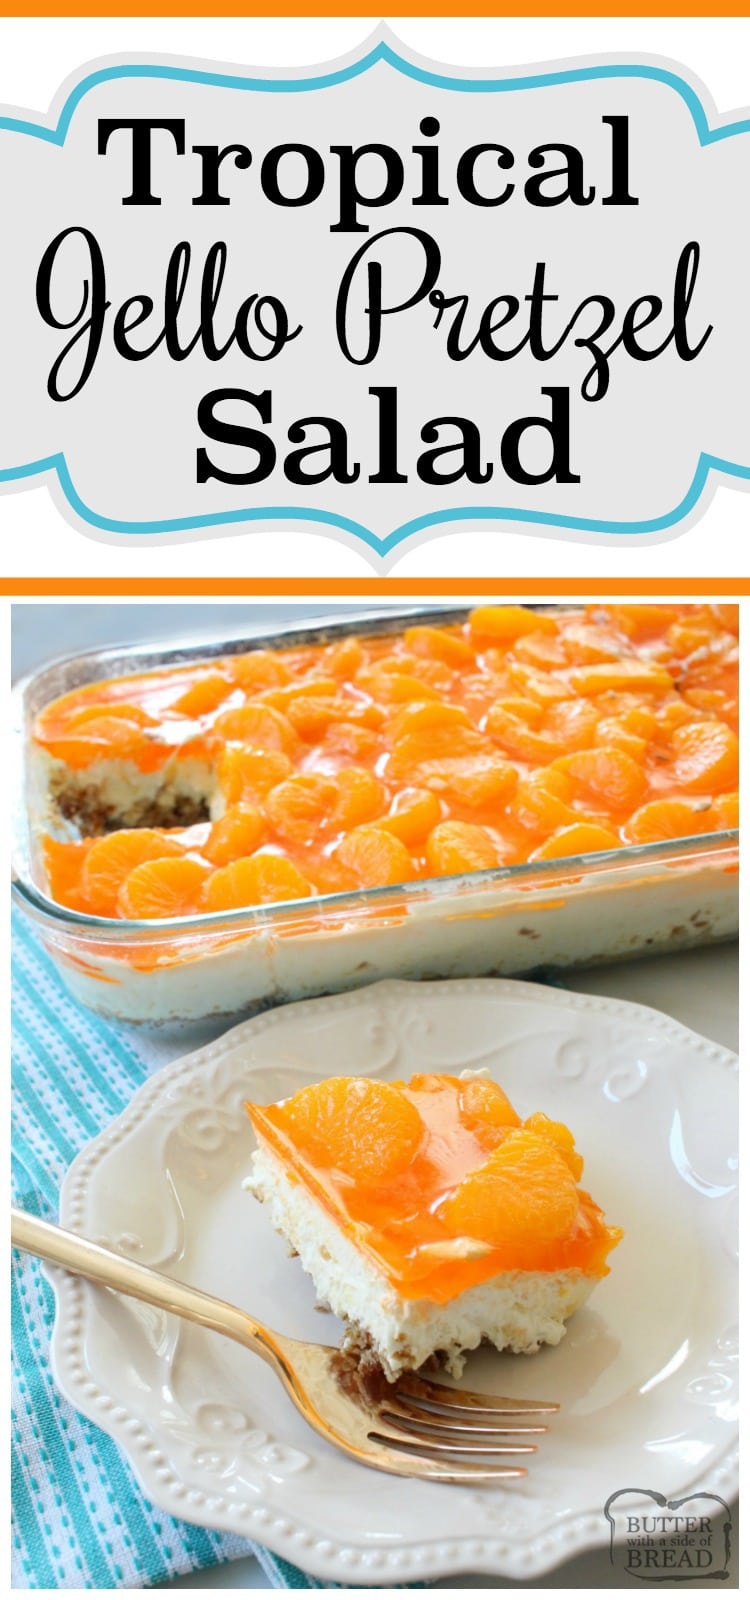 Tropical Jello Pretzel Salad is a sensational combination of juicy pineapple, toasty coconut flavor, yummy orange Jello with the added bonus of delicious mandarin oranges. It is so easy to make this mandarin orange Jello dessert, combining the simple yet delightful ingredients to create this amazing salad could not be easier. 